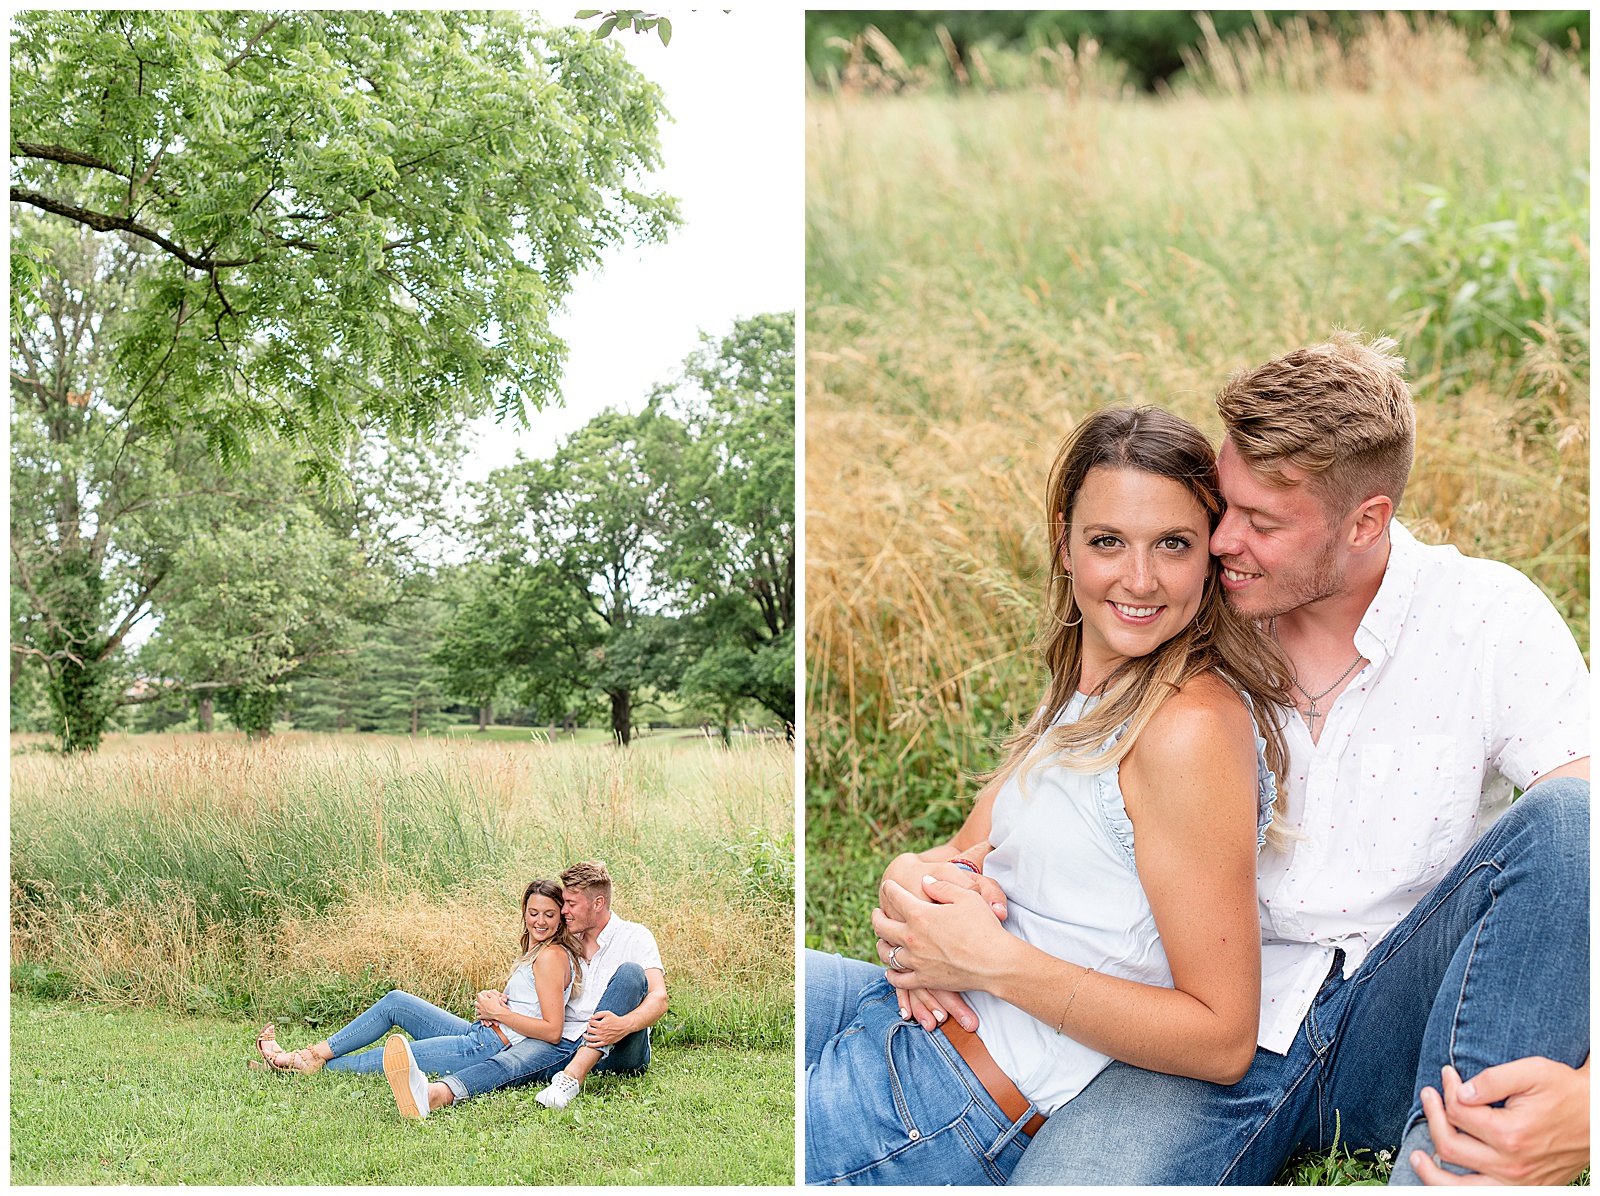 Engagement Session photos at Wyomissing Trails in Wyomissing PA